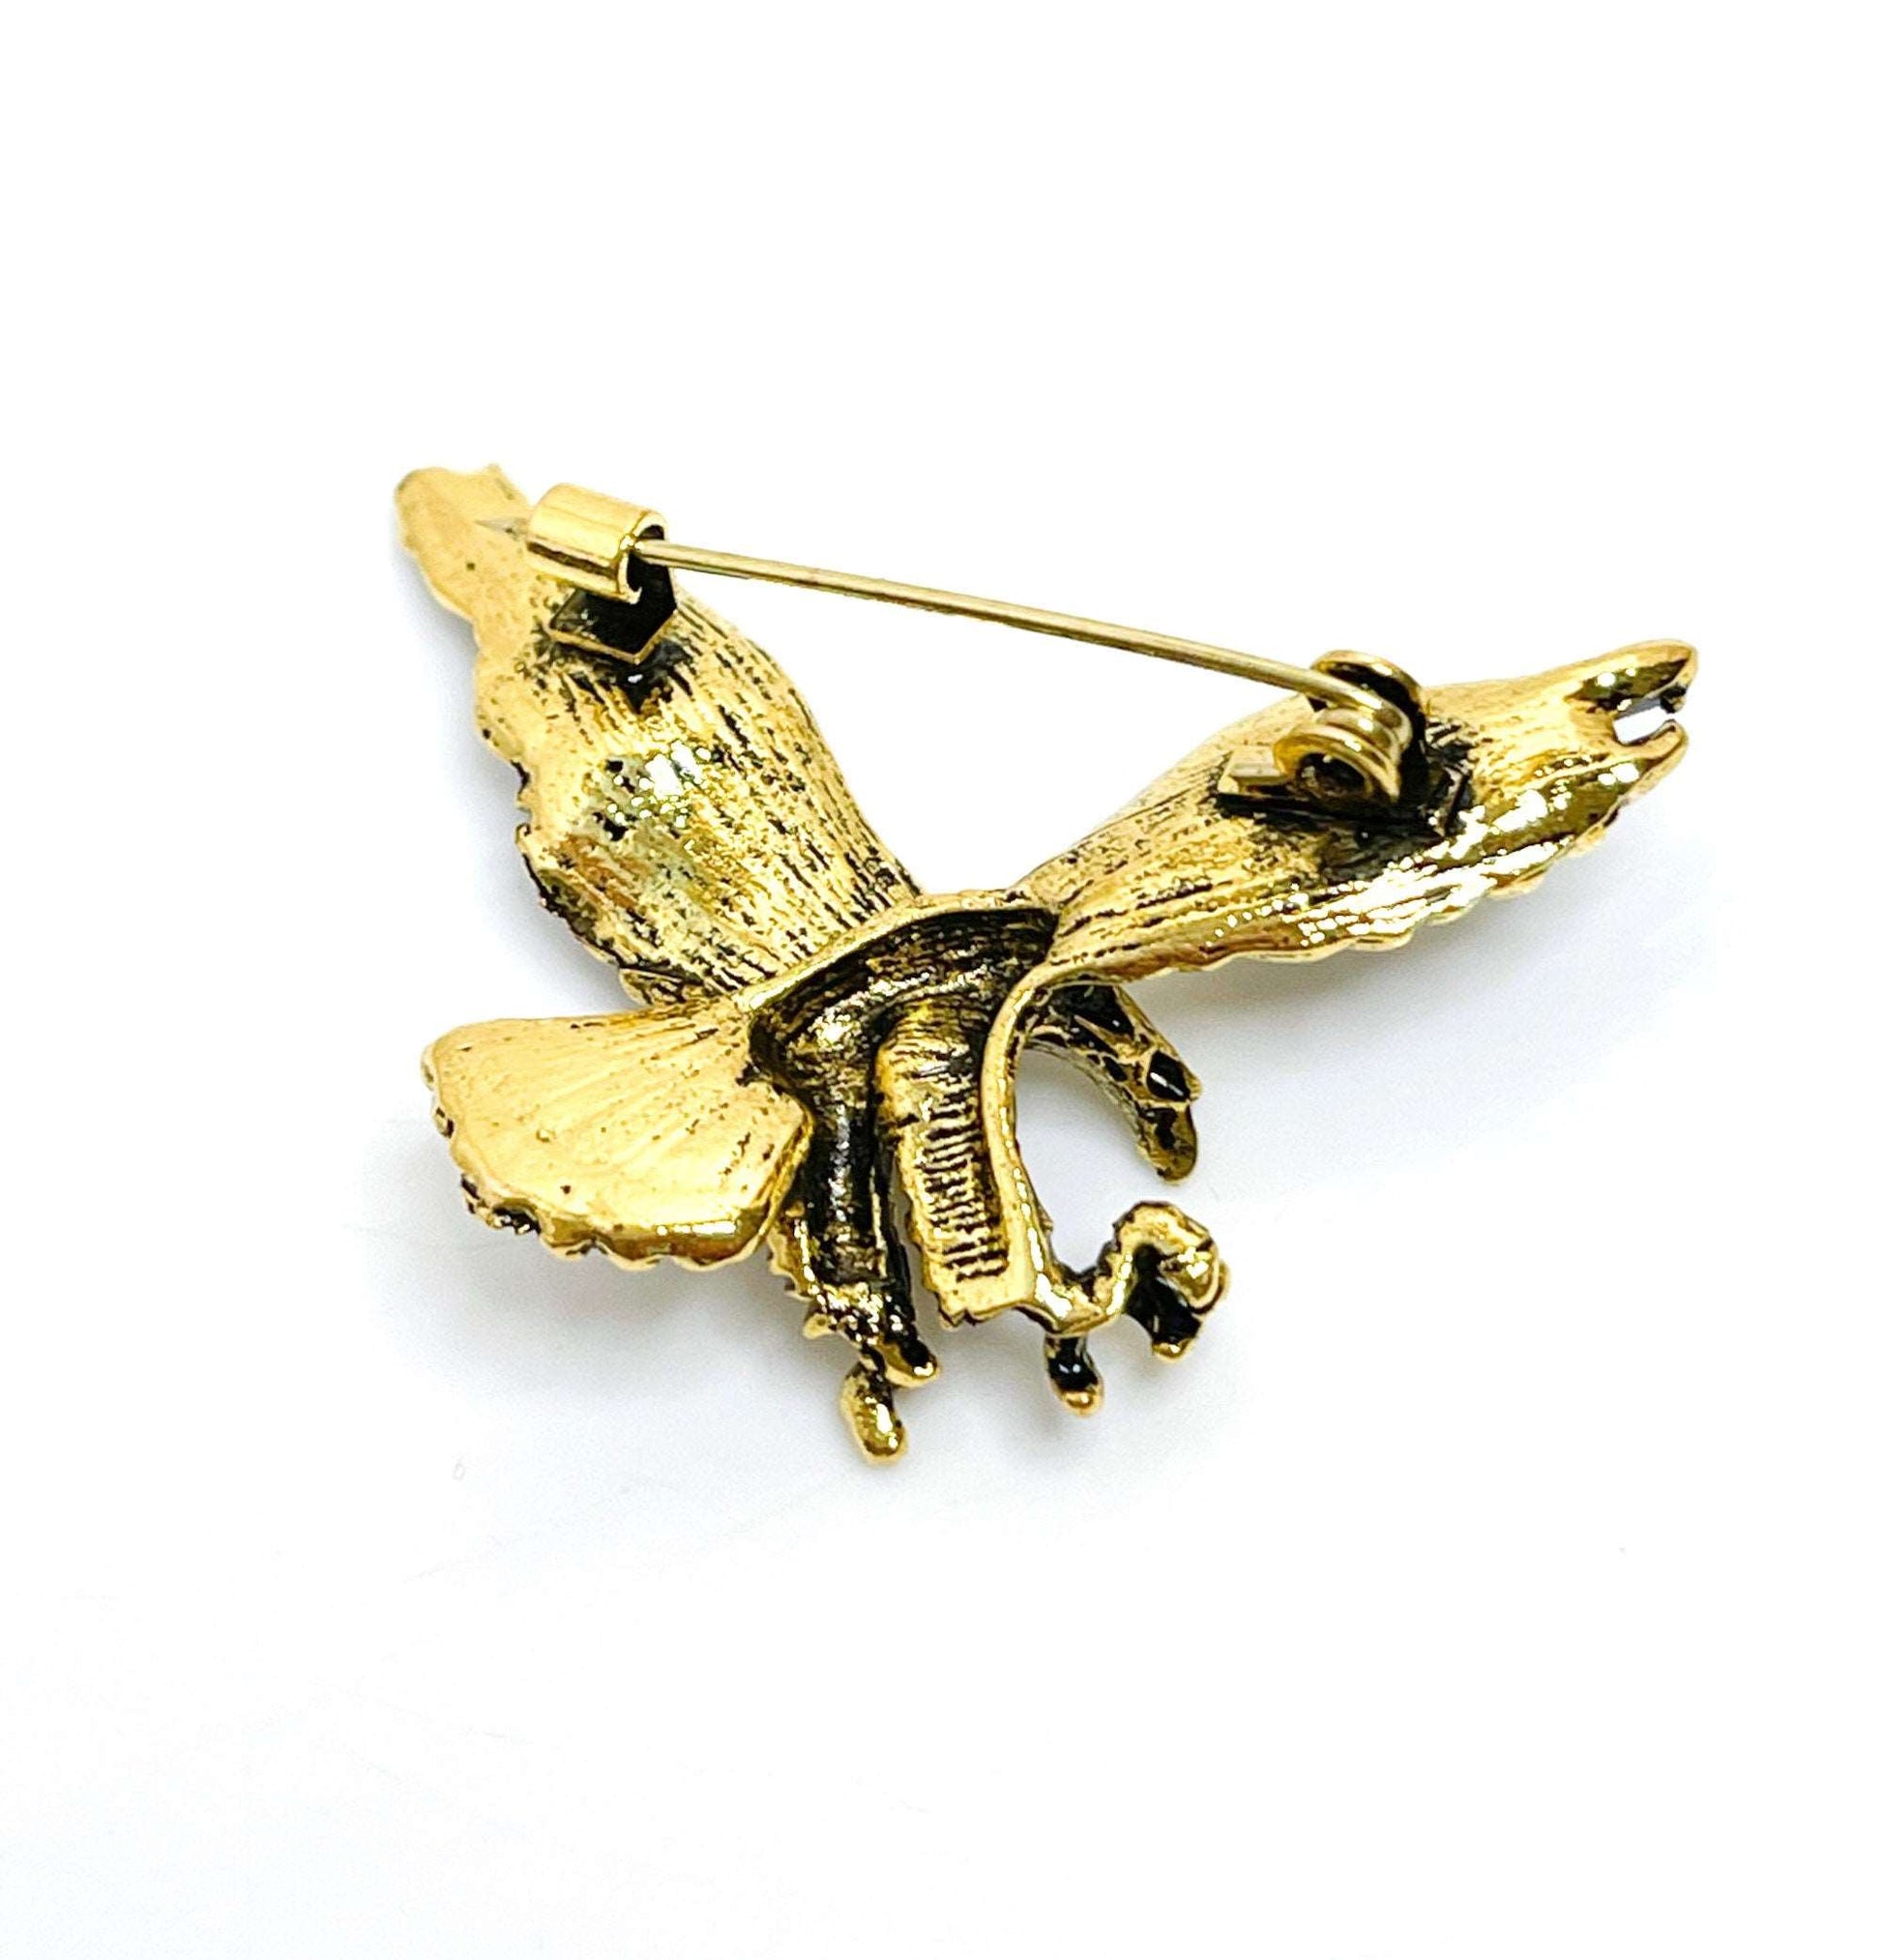 Antique Gold Swooping Eagle Brooch, Gothic Brooch, Unisex Jewellery, Vintage Style Bikers Pin, Rockers Pin, Flying Eagle Pin